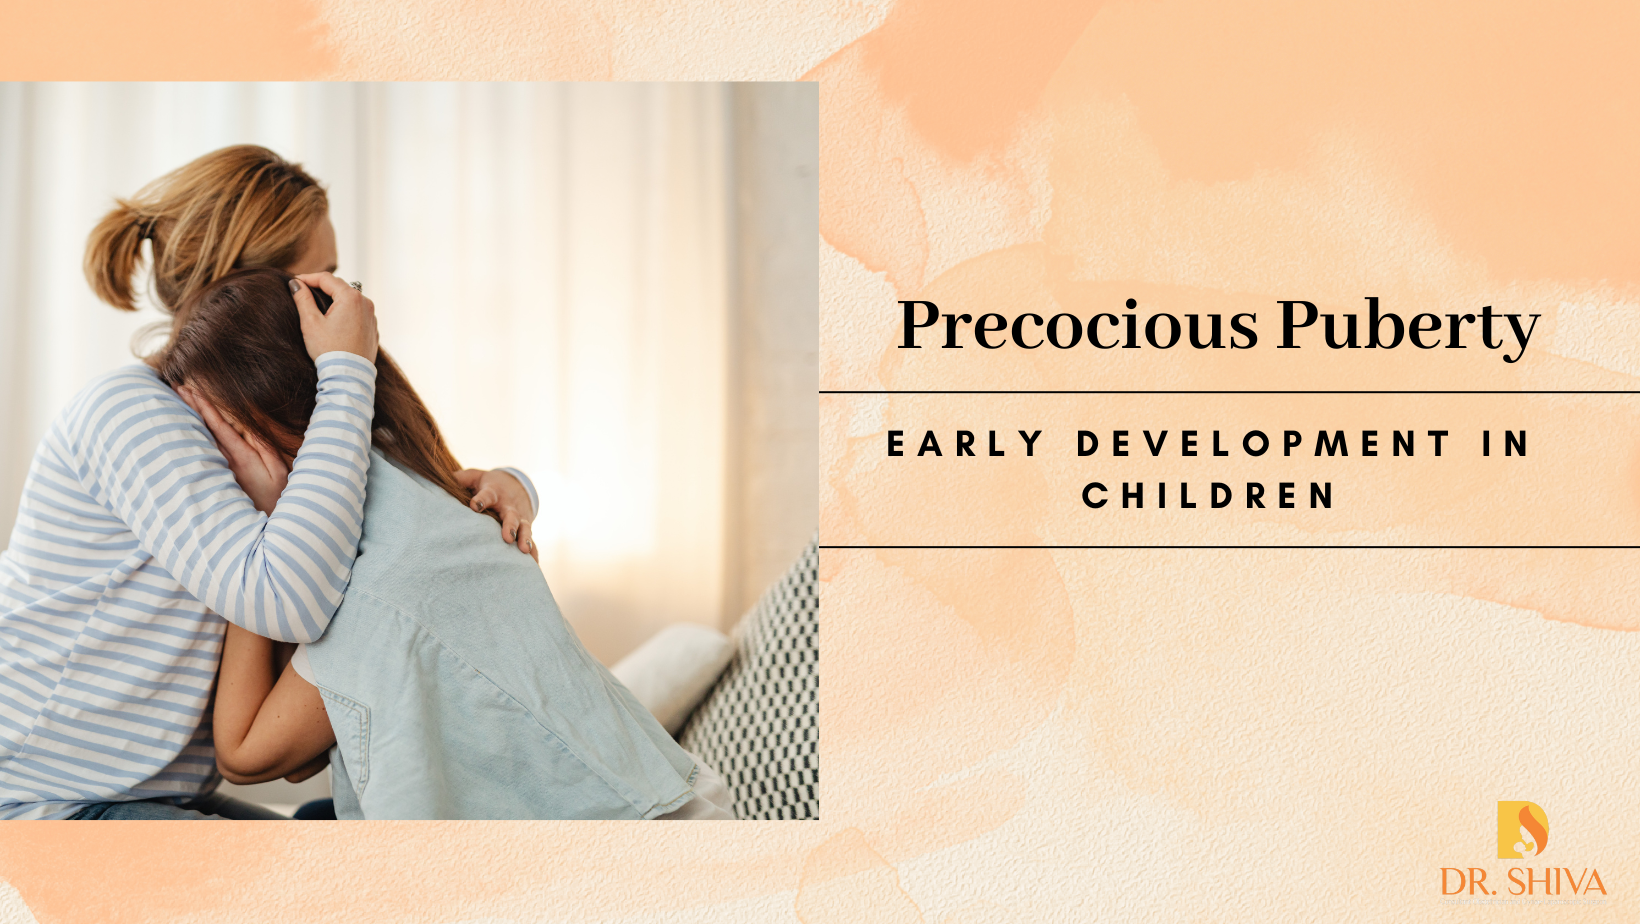 Precocious Puberty: Early Development in Children